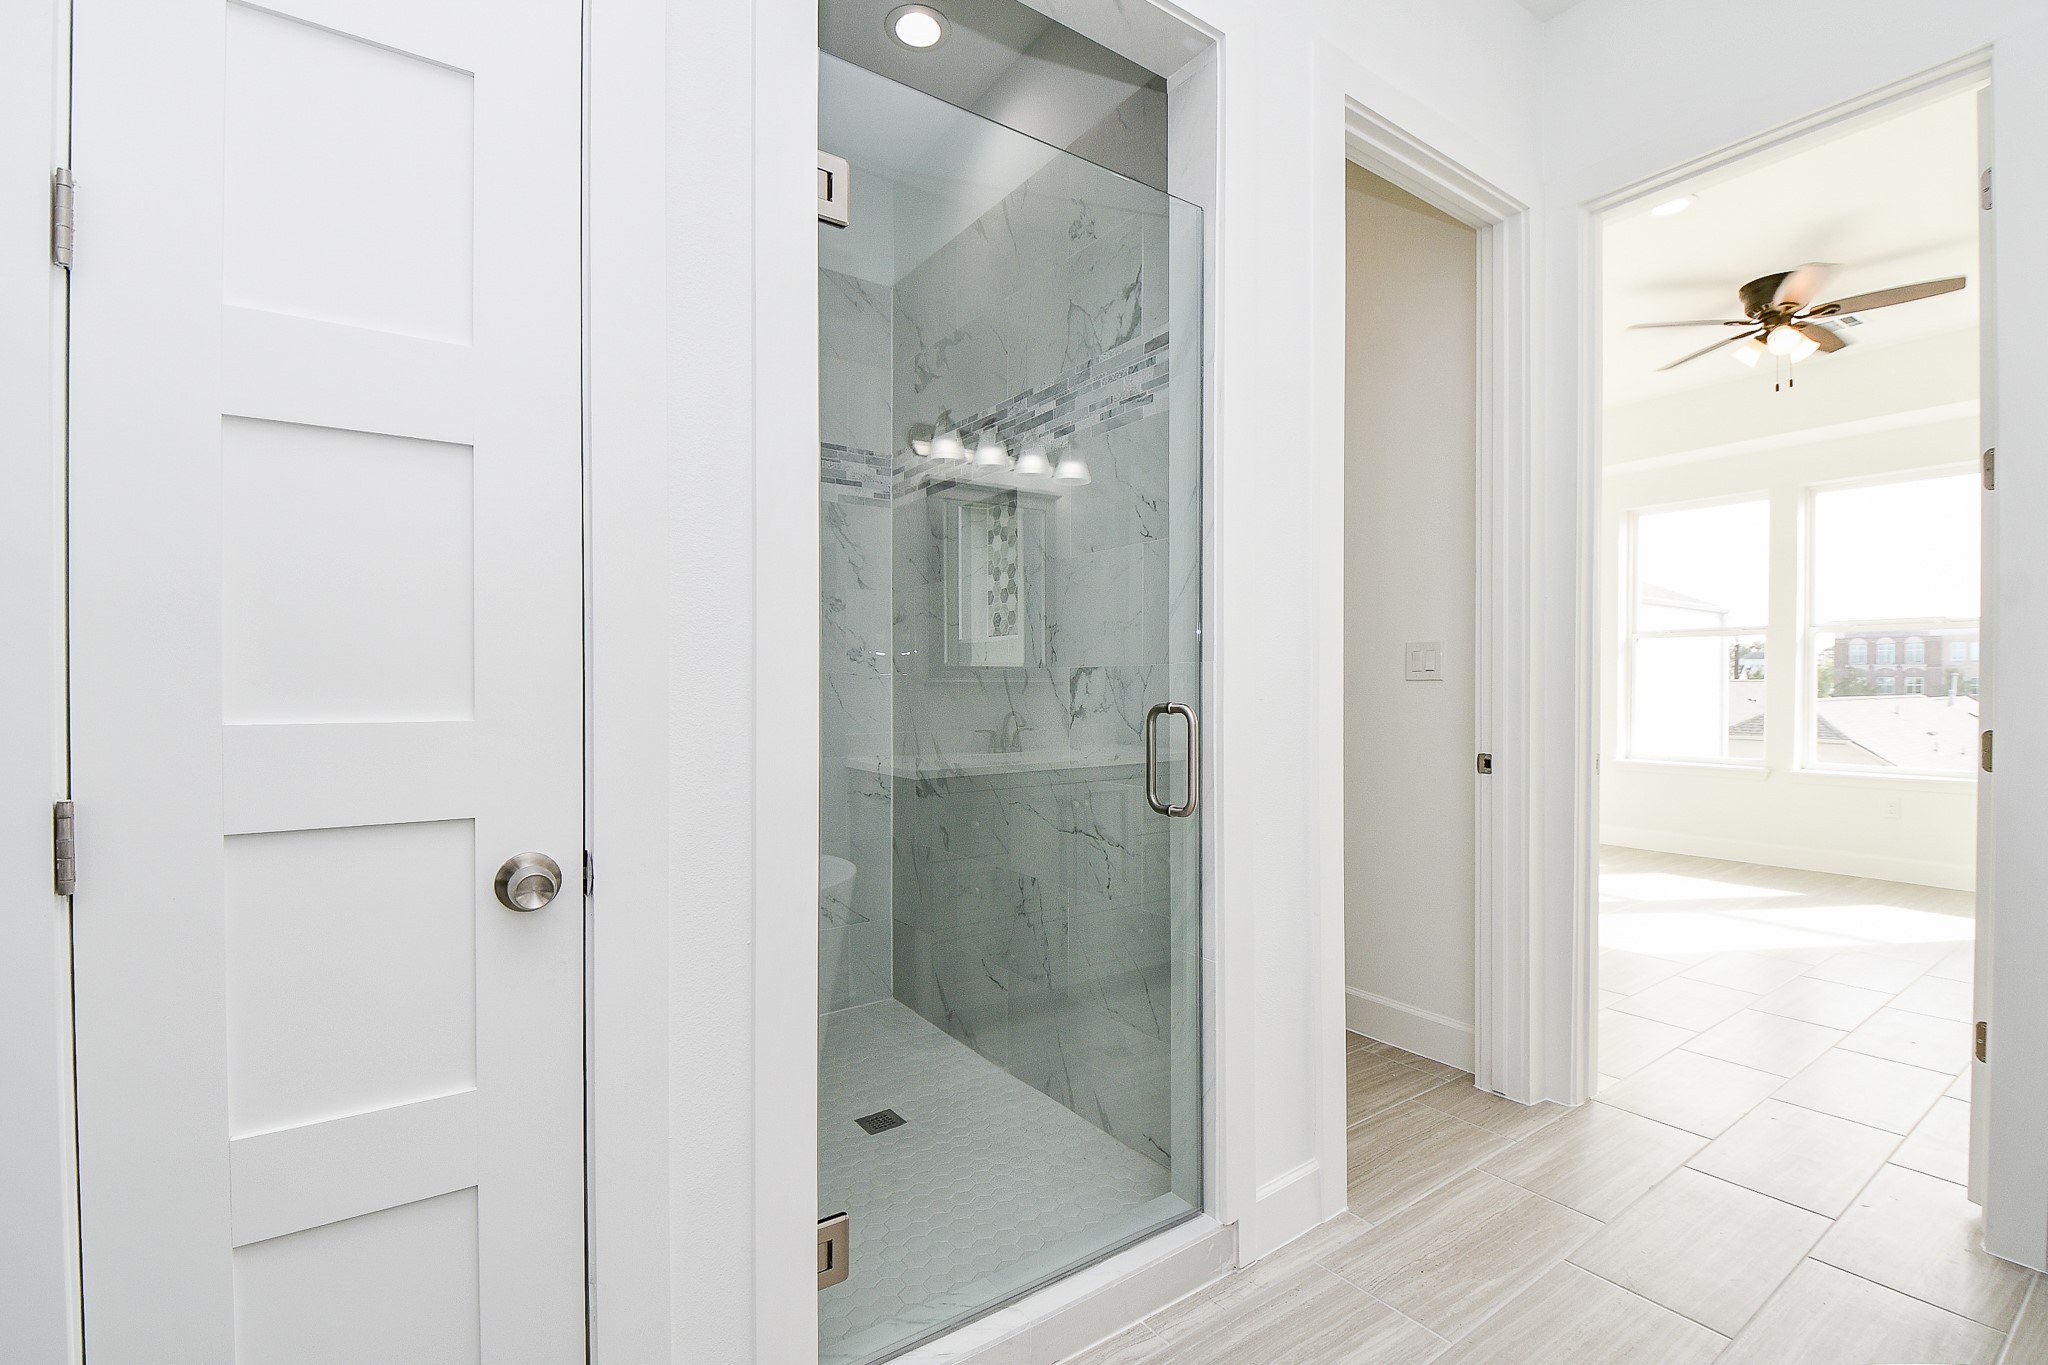 The shower is nicely recessed as a space saving feature.